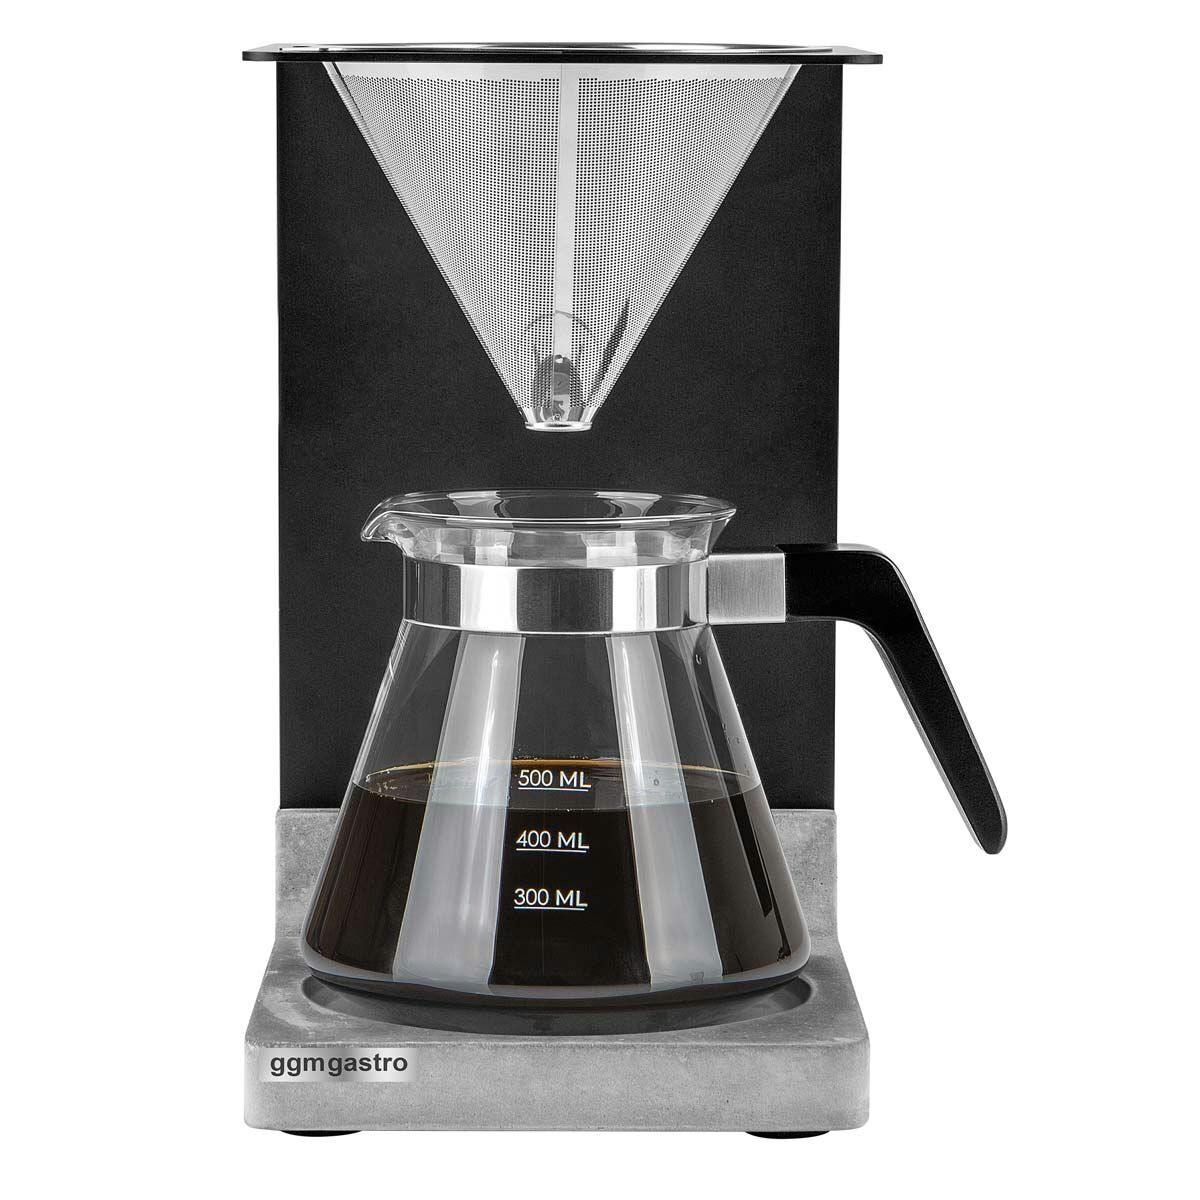 BEEM Coffee Maker Set For Oven in Concrete - 0.5 liters